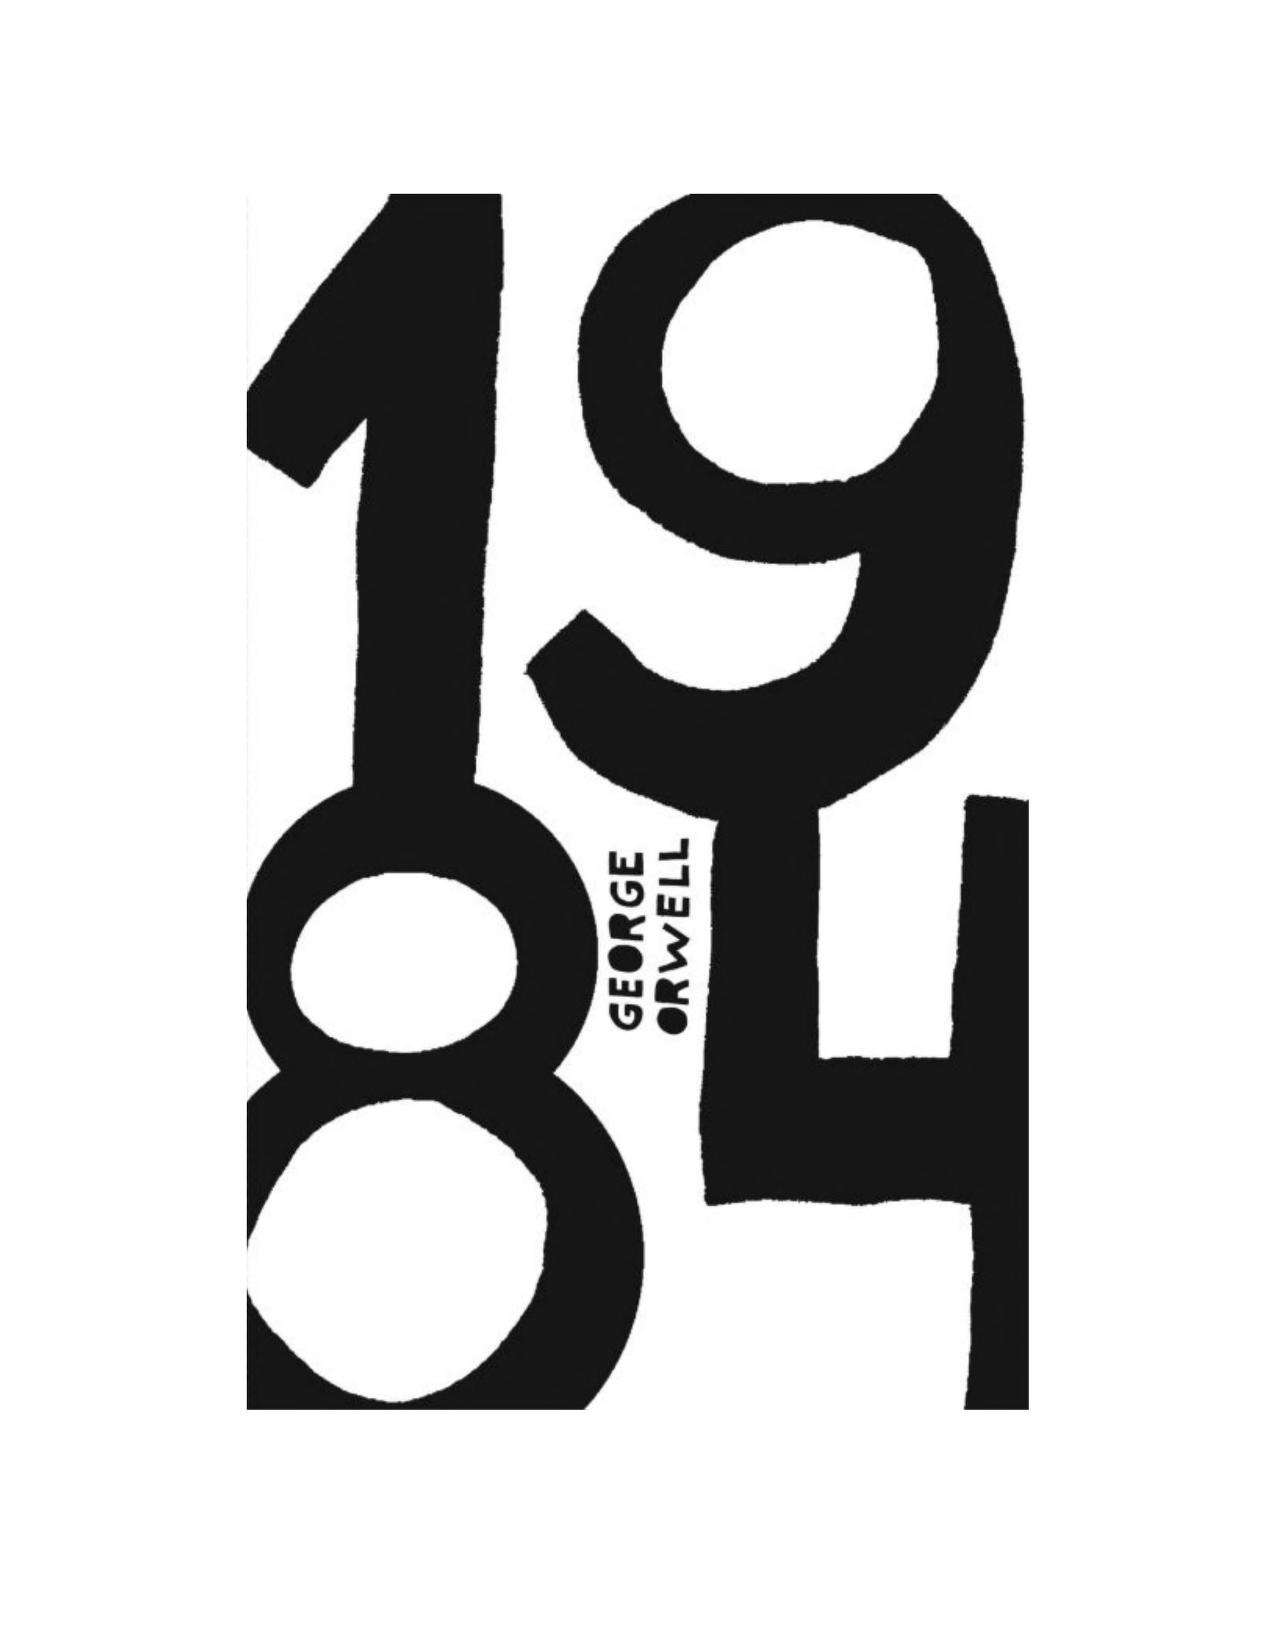 1984 george orwell pdf download portugues fitcloudpro app download